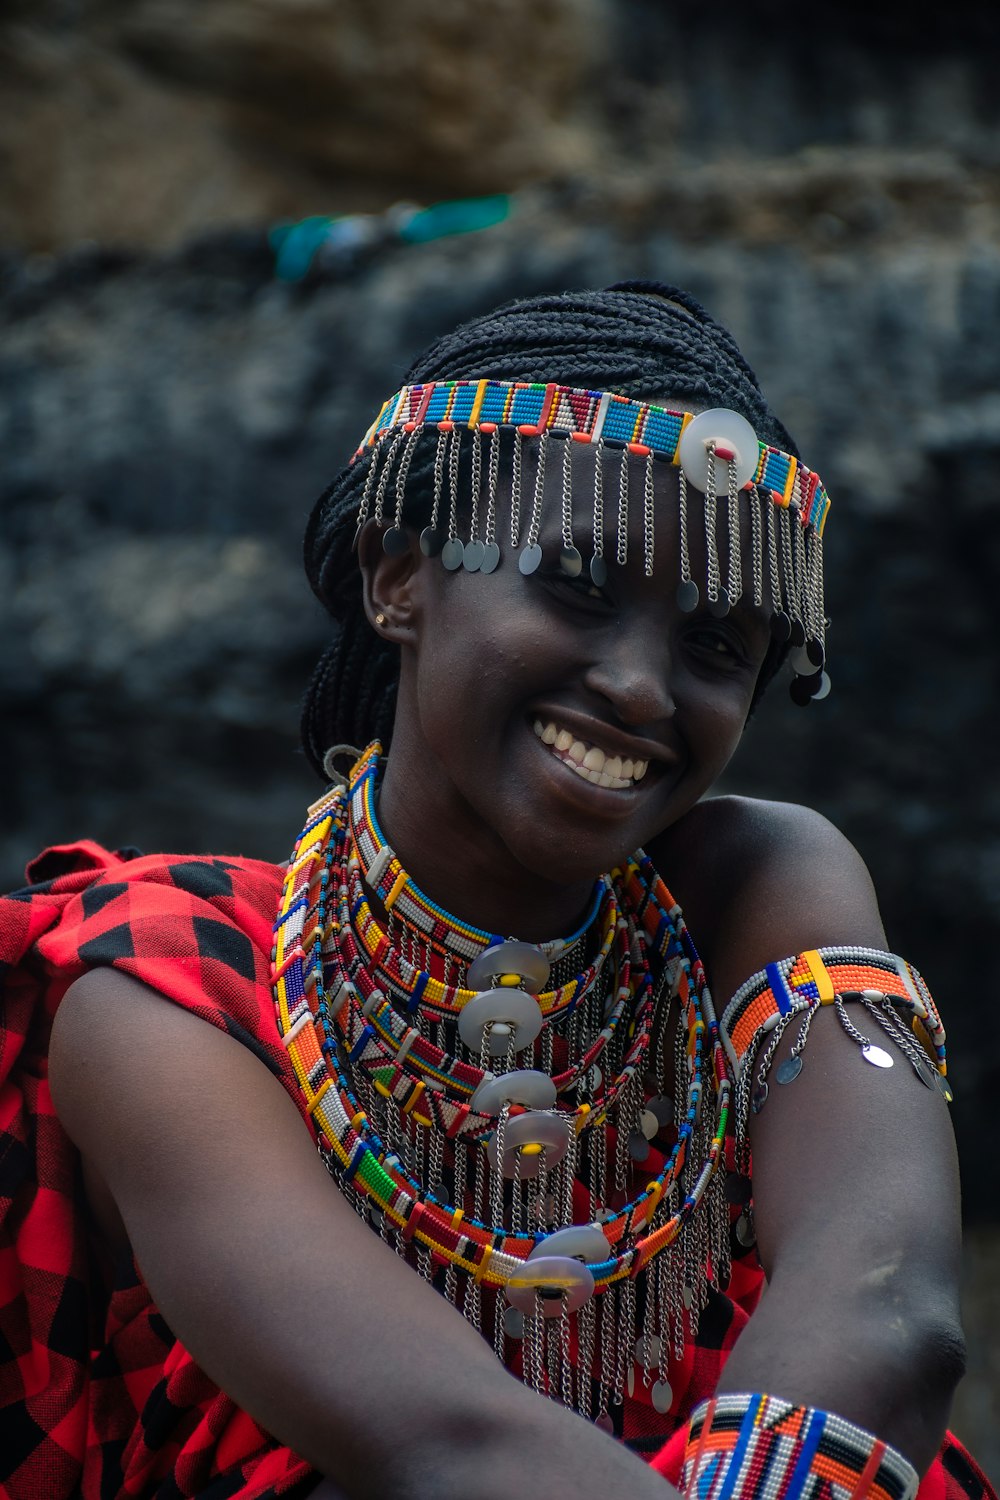 a woman in a colorful dress smiles for the camera